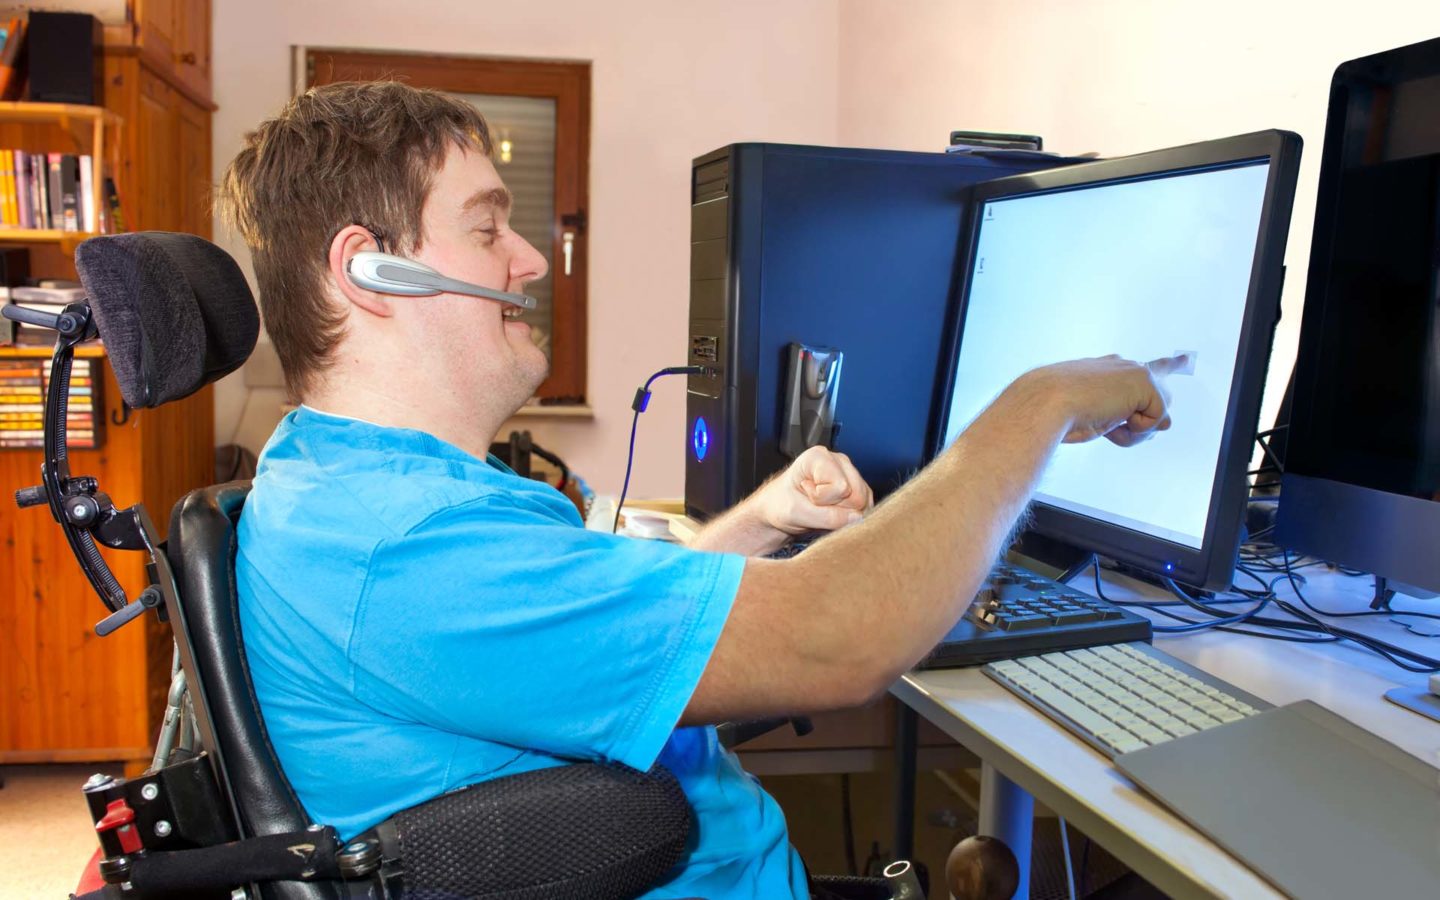 Young person with cerebral palsy using a computer